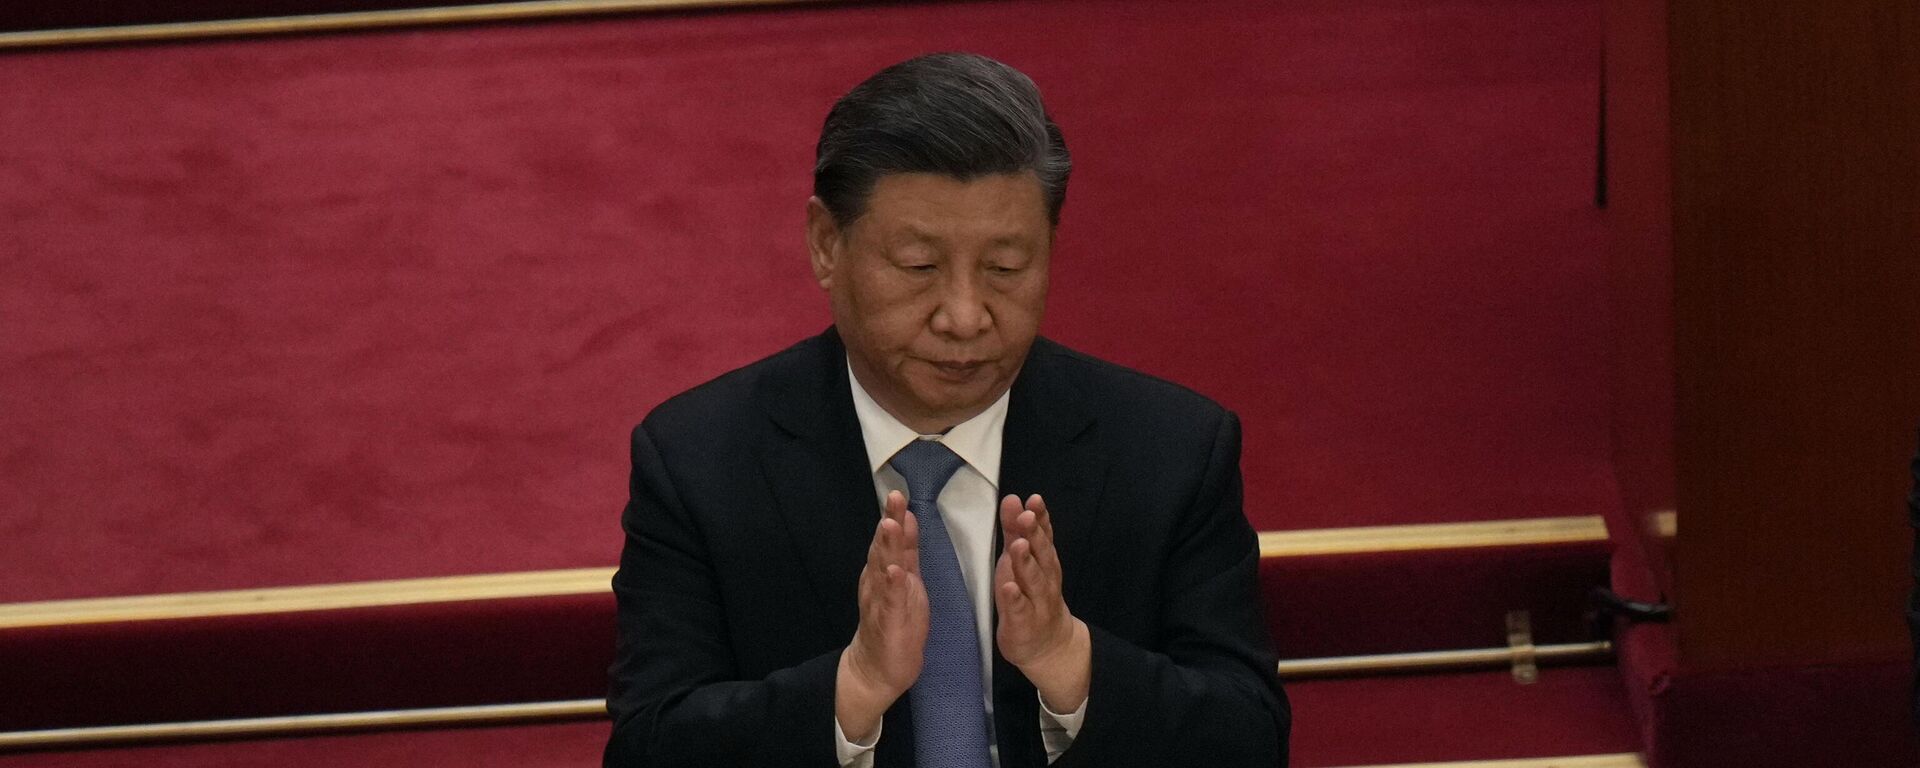 Chinese President Xi Jinping applauds during the opening session of the Chinese People's Political Consultative Congress (CPPCC) at the Great Hall of the People in Beijing, Saturday, March 4, 2023. (AP Photo/Andy Wong) - Sputnik International, 1920, 22.08.2023